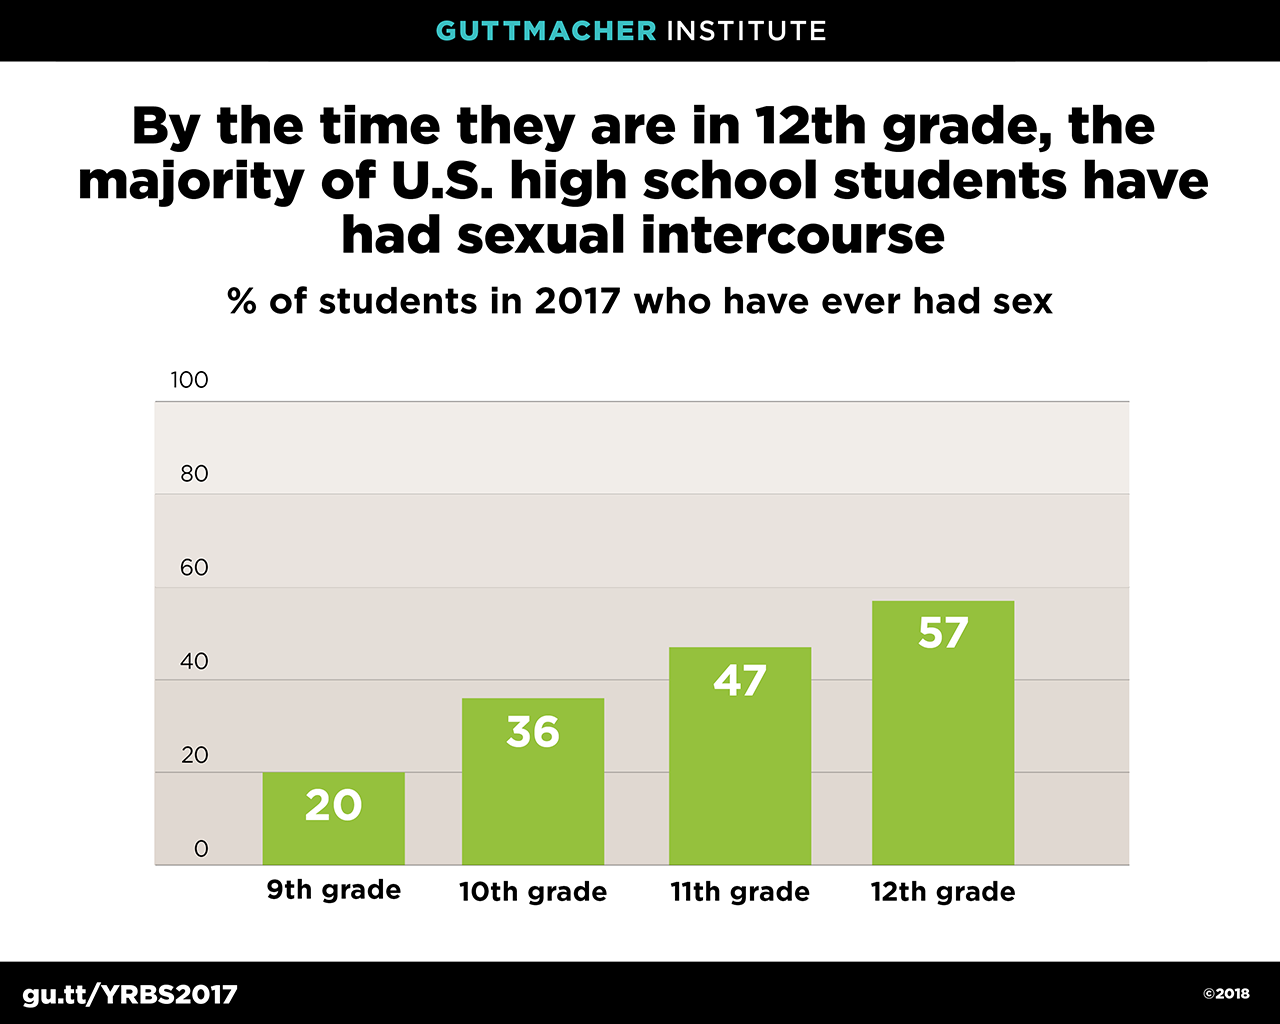 Graphic: By the time they are in 12th grade, the majority of U.S. high school students have had sexual intercourse